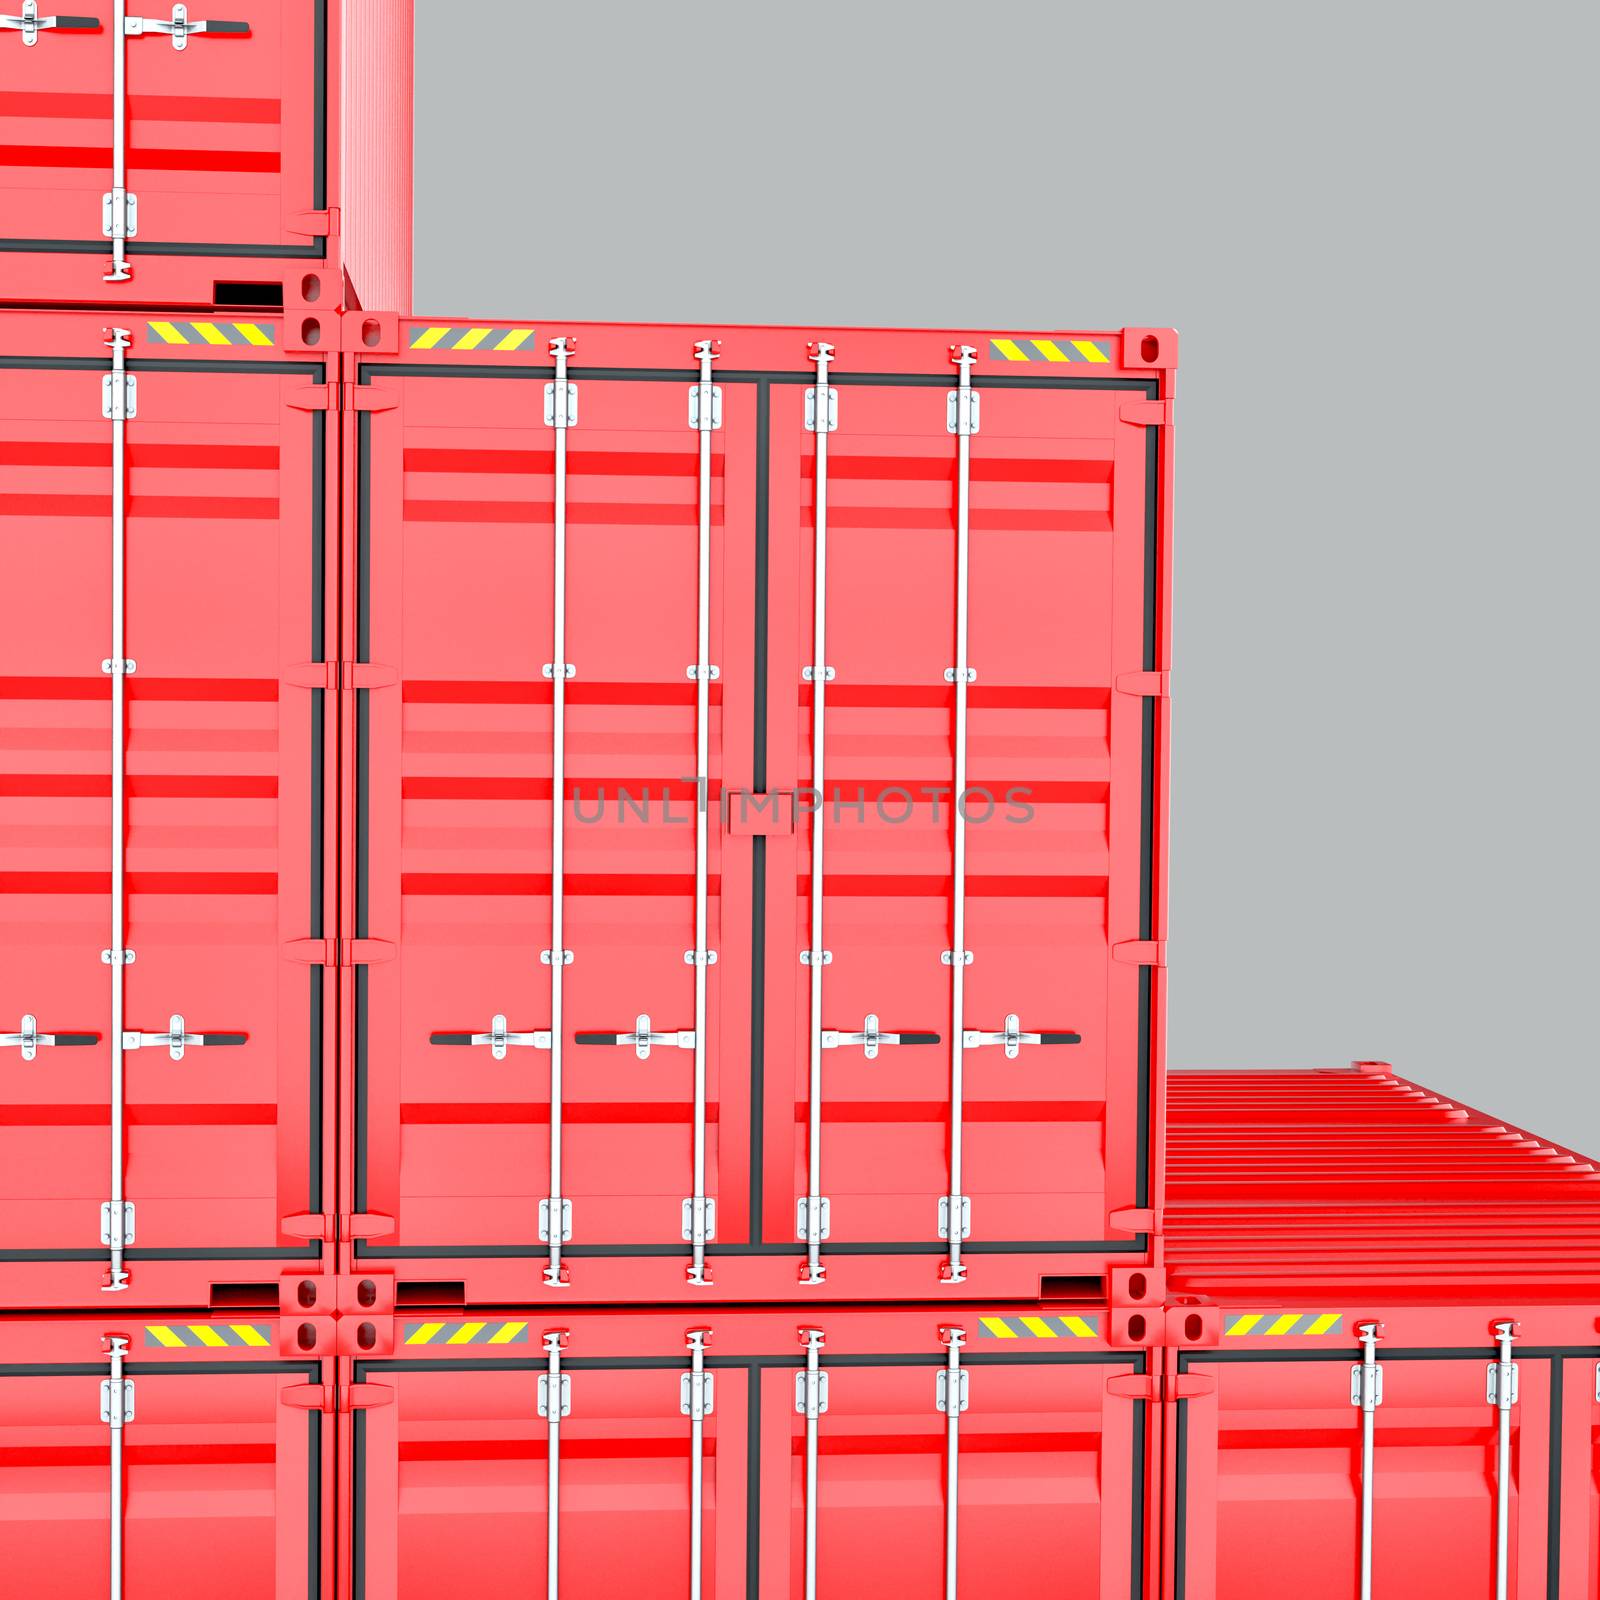 A Stack of Cargo Containers for Overseas Shipping. Close-up 3D Rendering